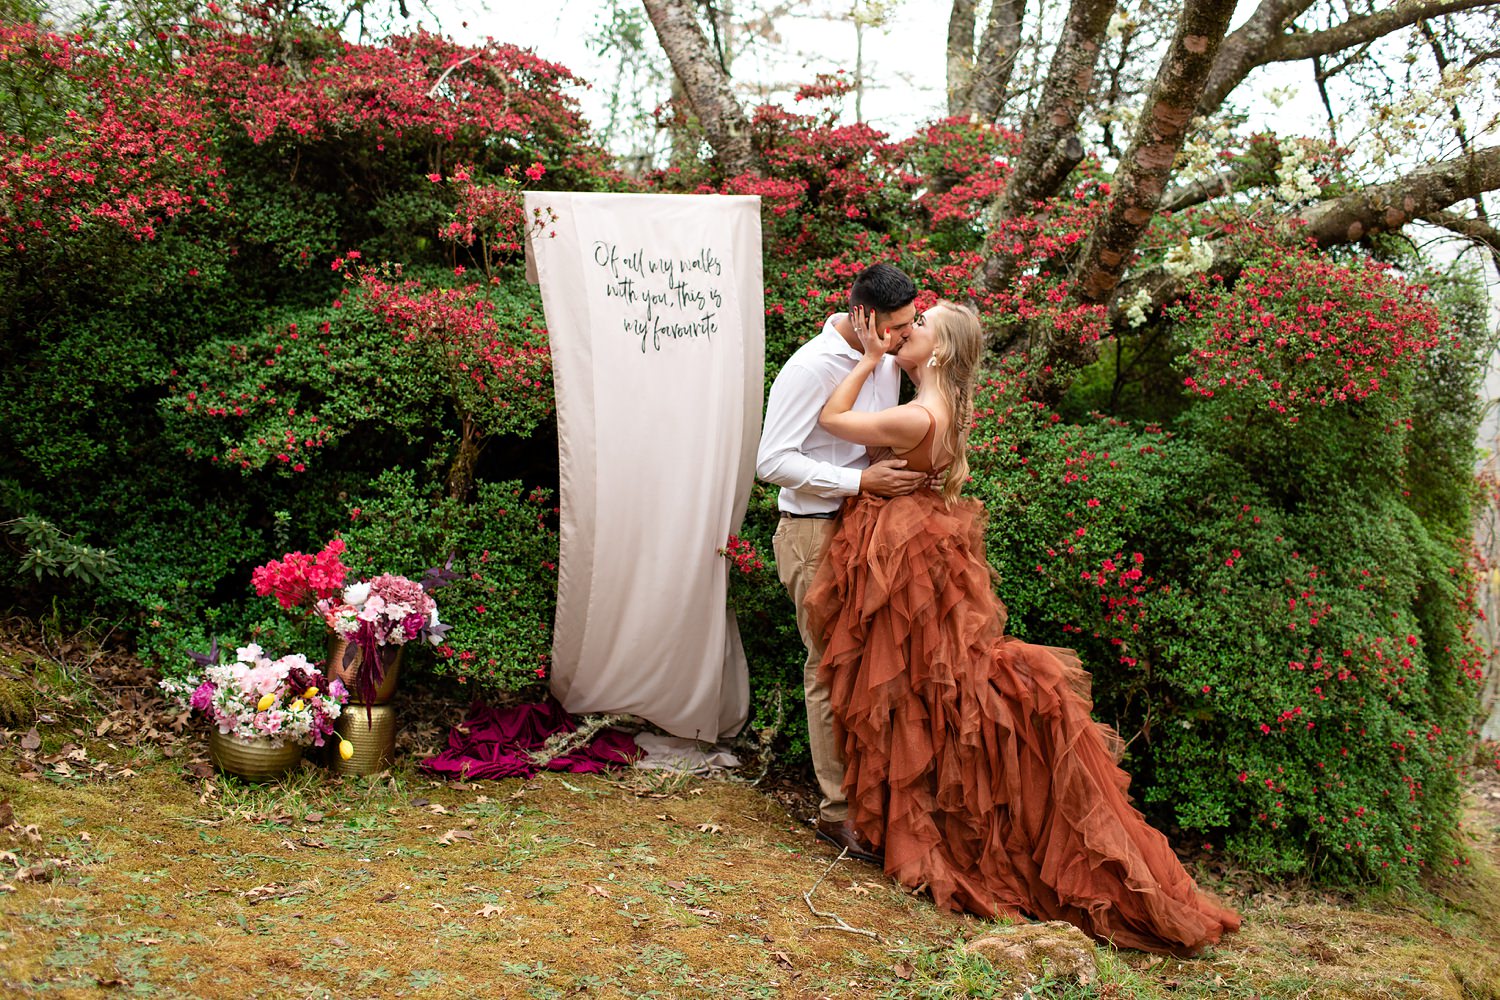 Bride, in a burnt orange wedding dress by Silver Swallow, and Groom kiss at the end of the ceremony in fornt of a DIY banner and azalea flowers in Magoebaskloof, South Africa.